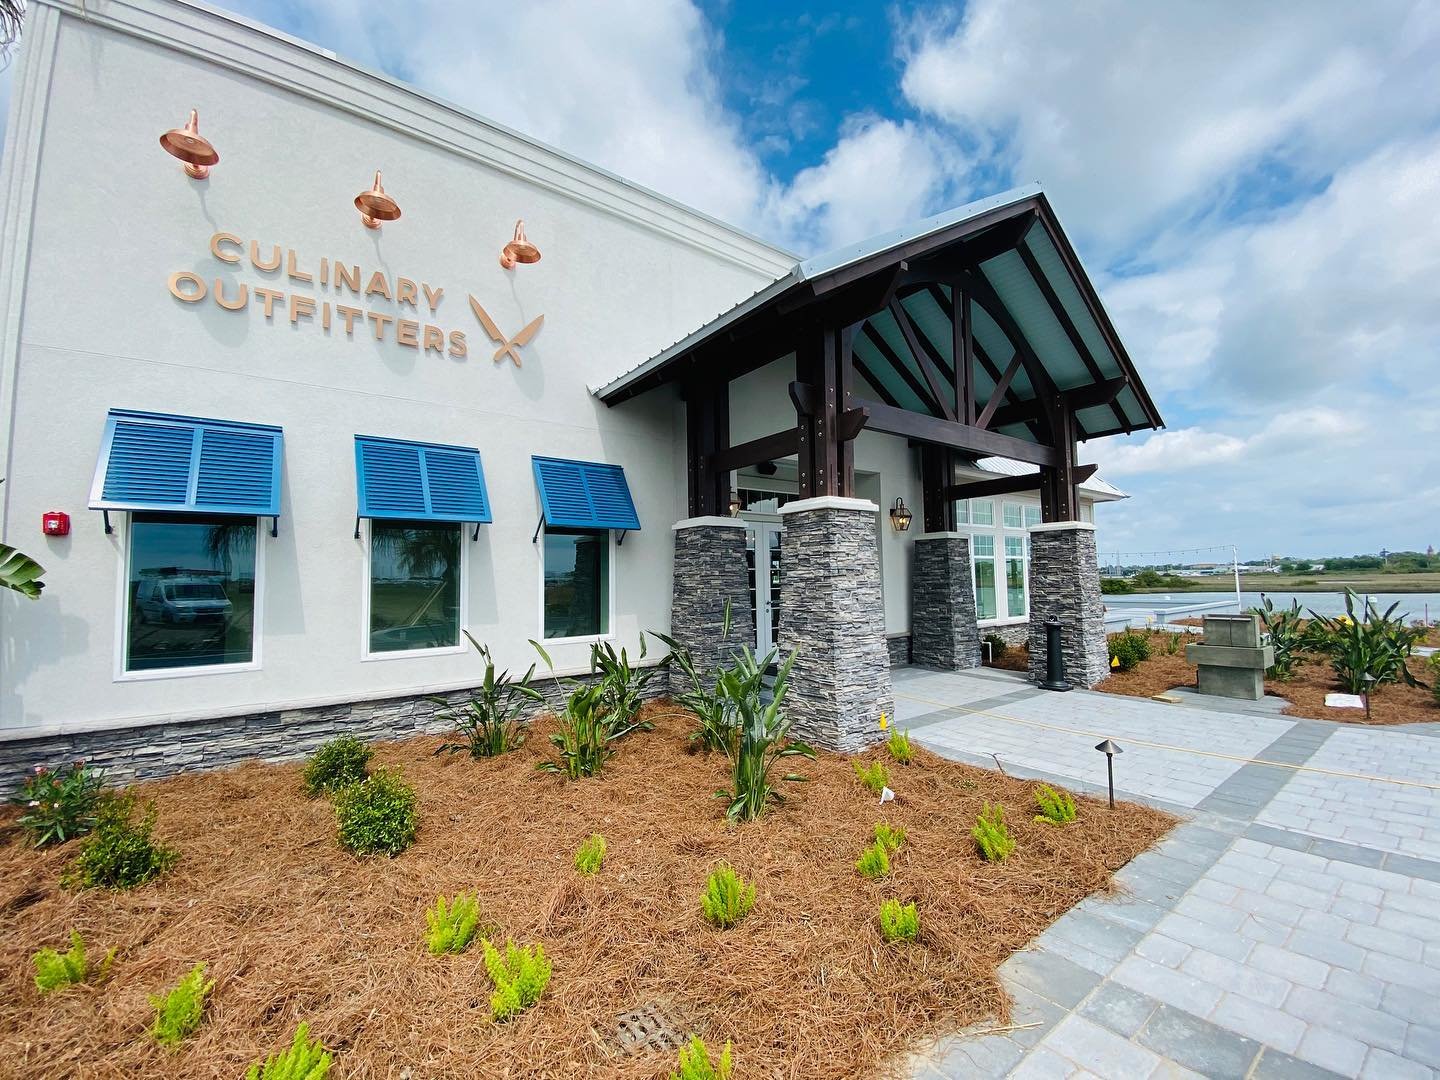 Culinary Outfitters opened May 8 at 173 Shipyard Way in St. Augustine.